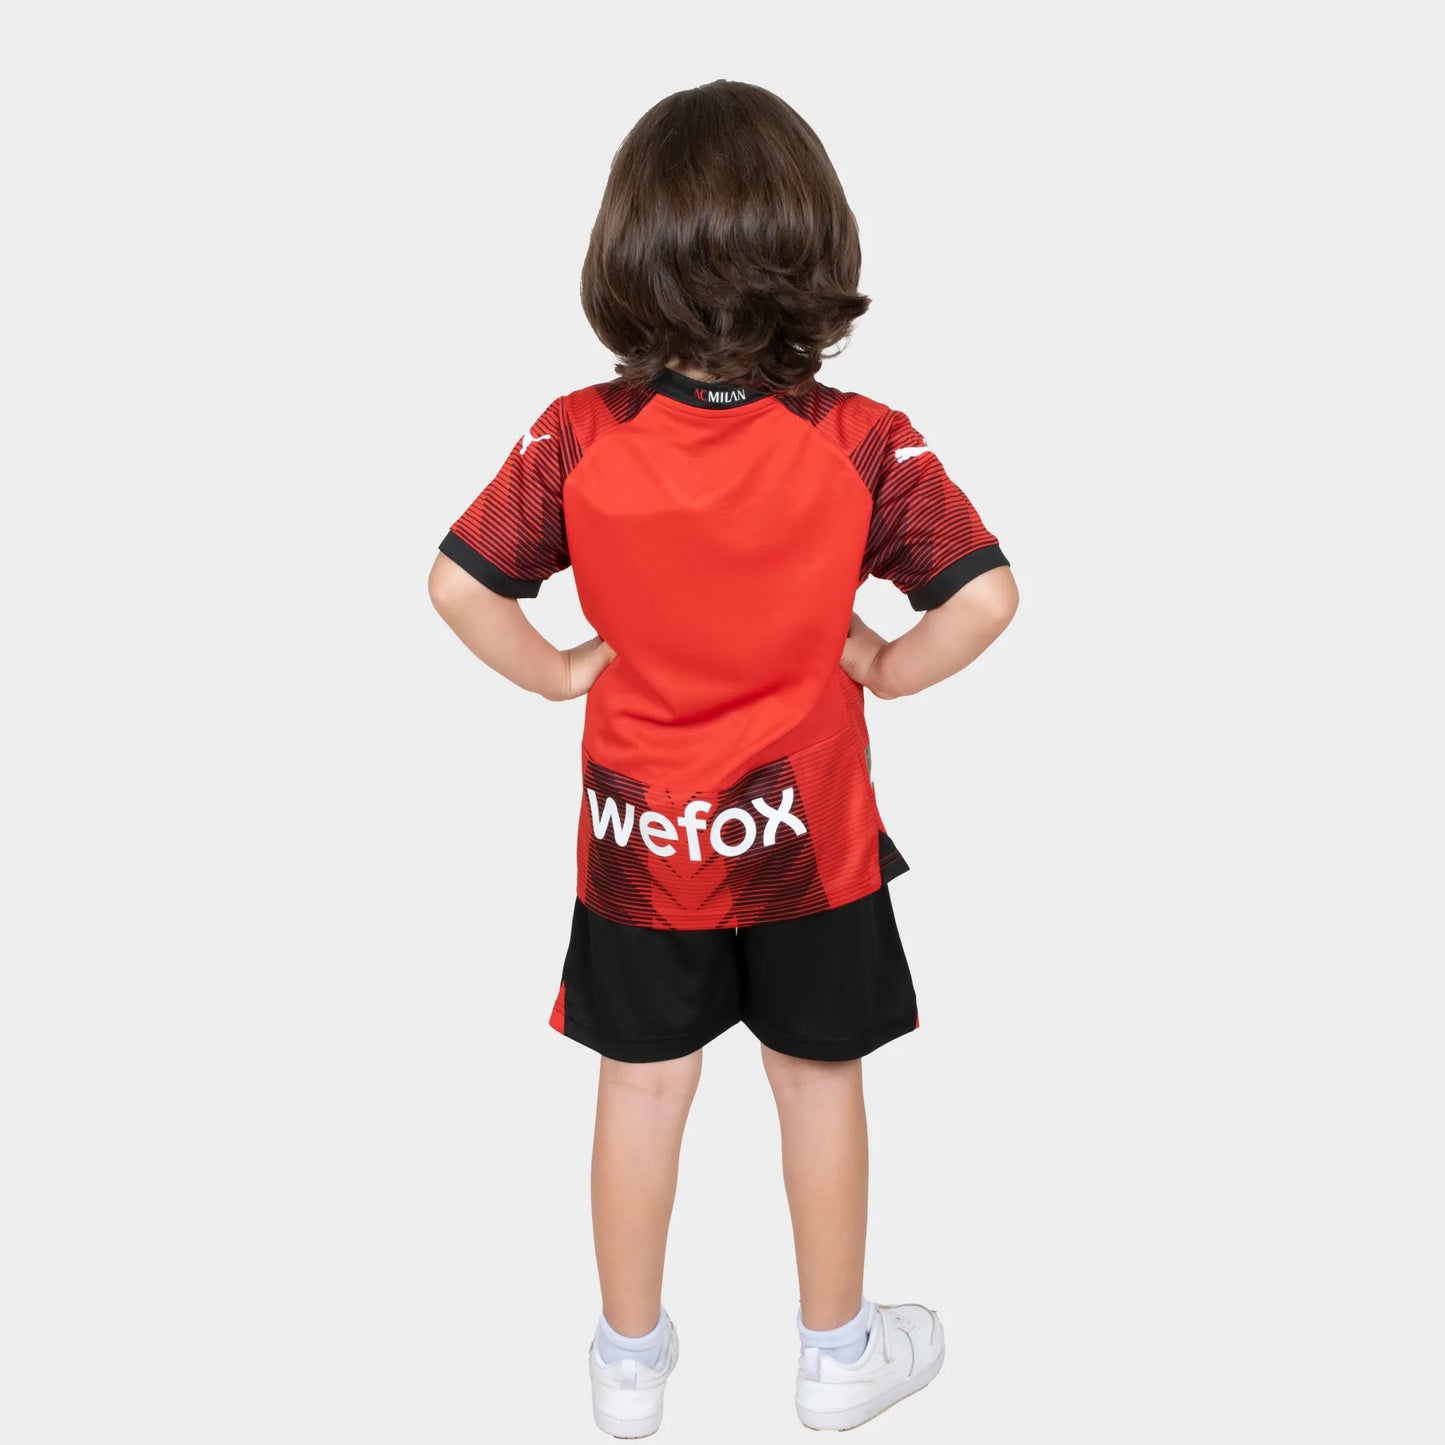 AC Milan 23/24 Home Kit in Red Jersey and Black Shorts